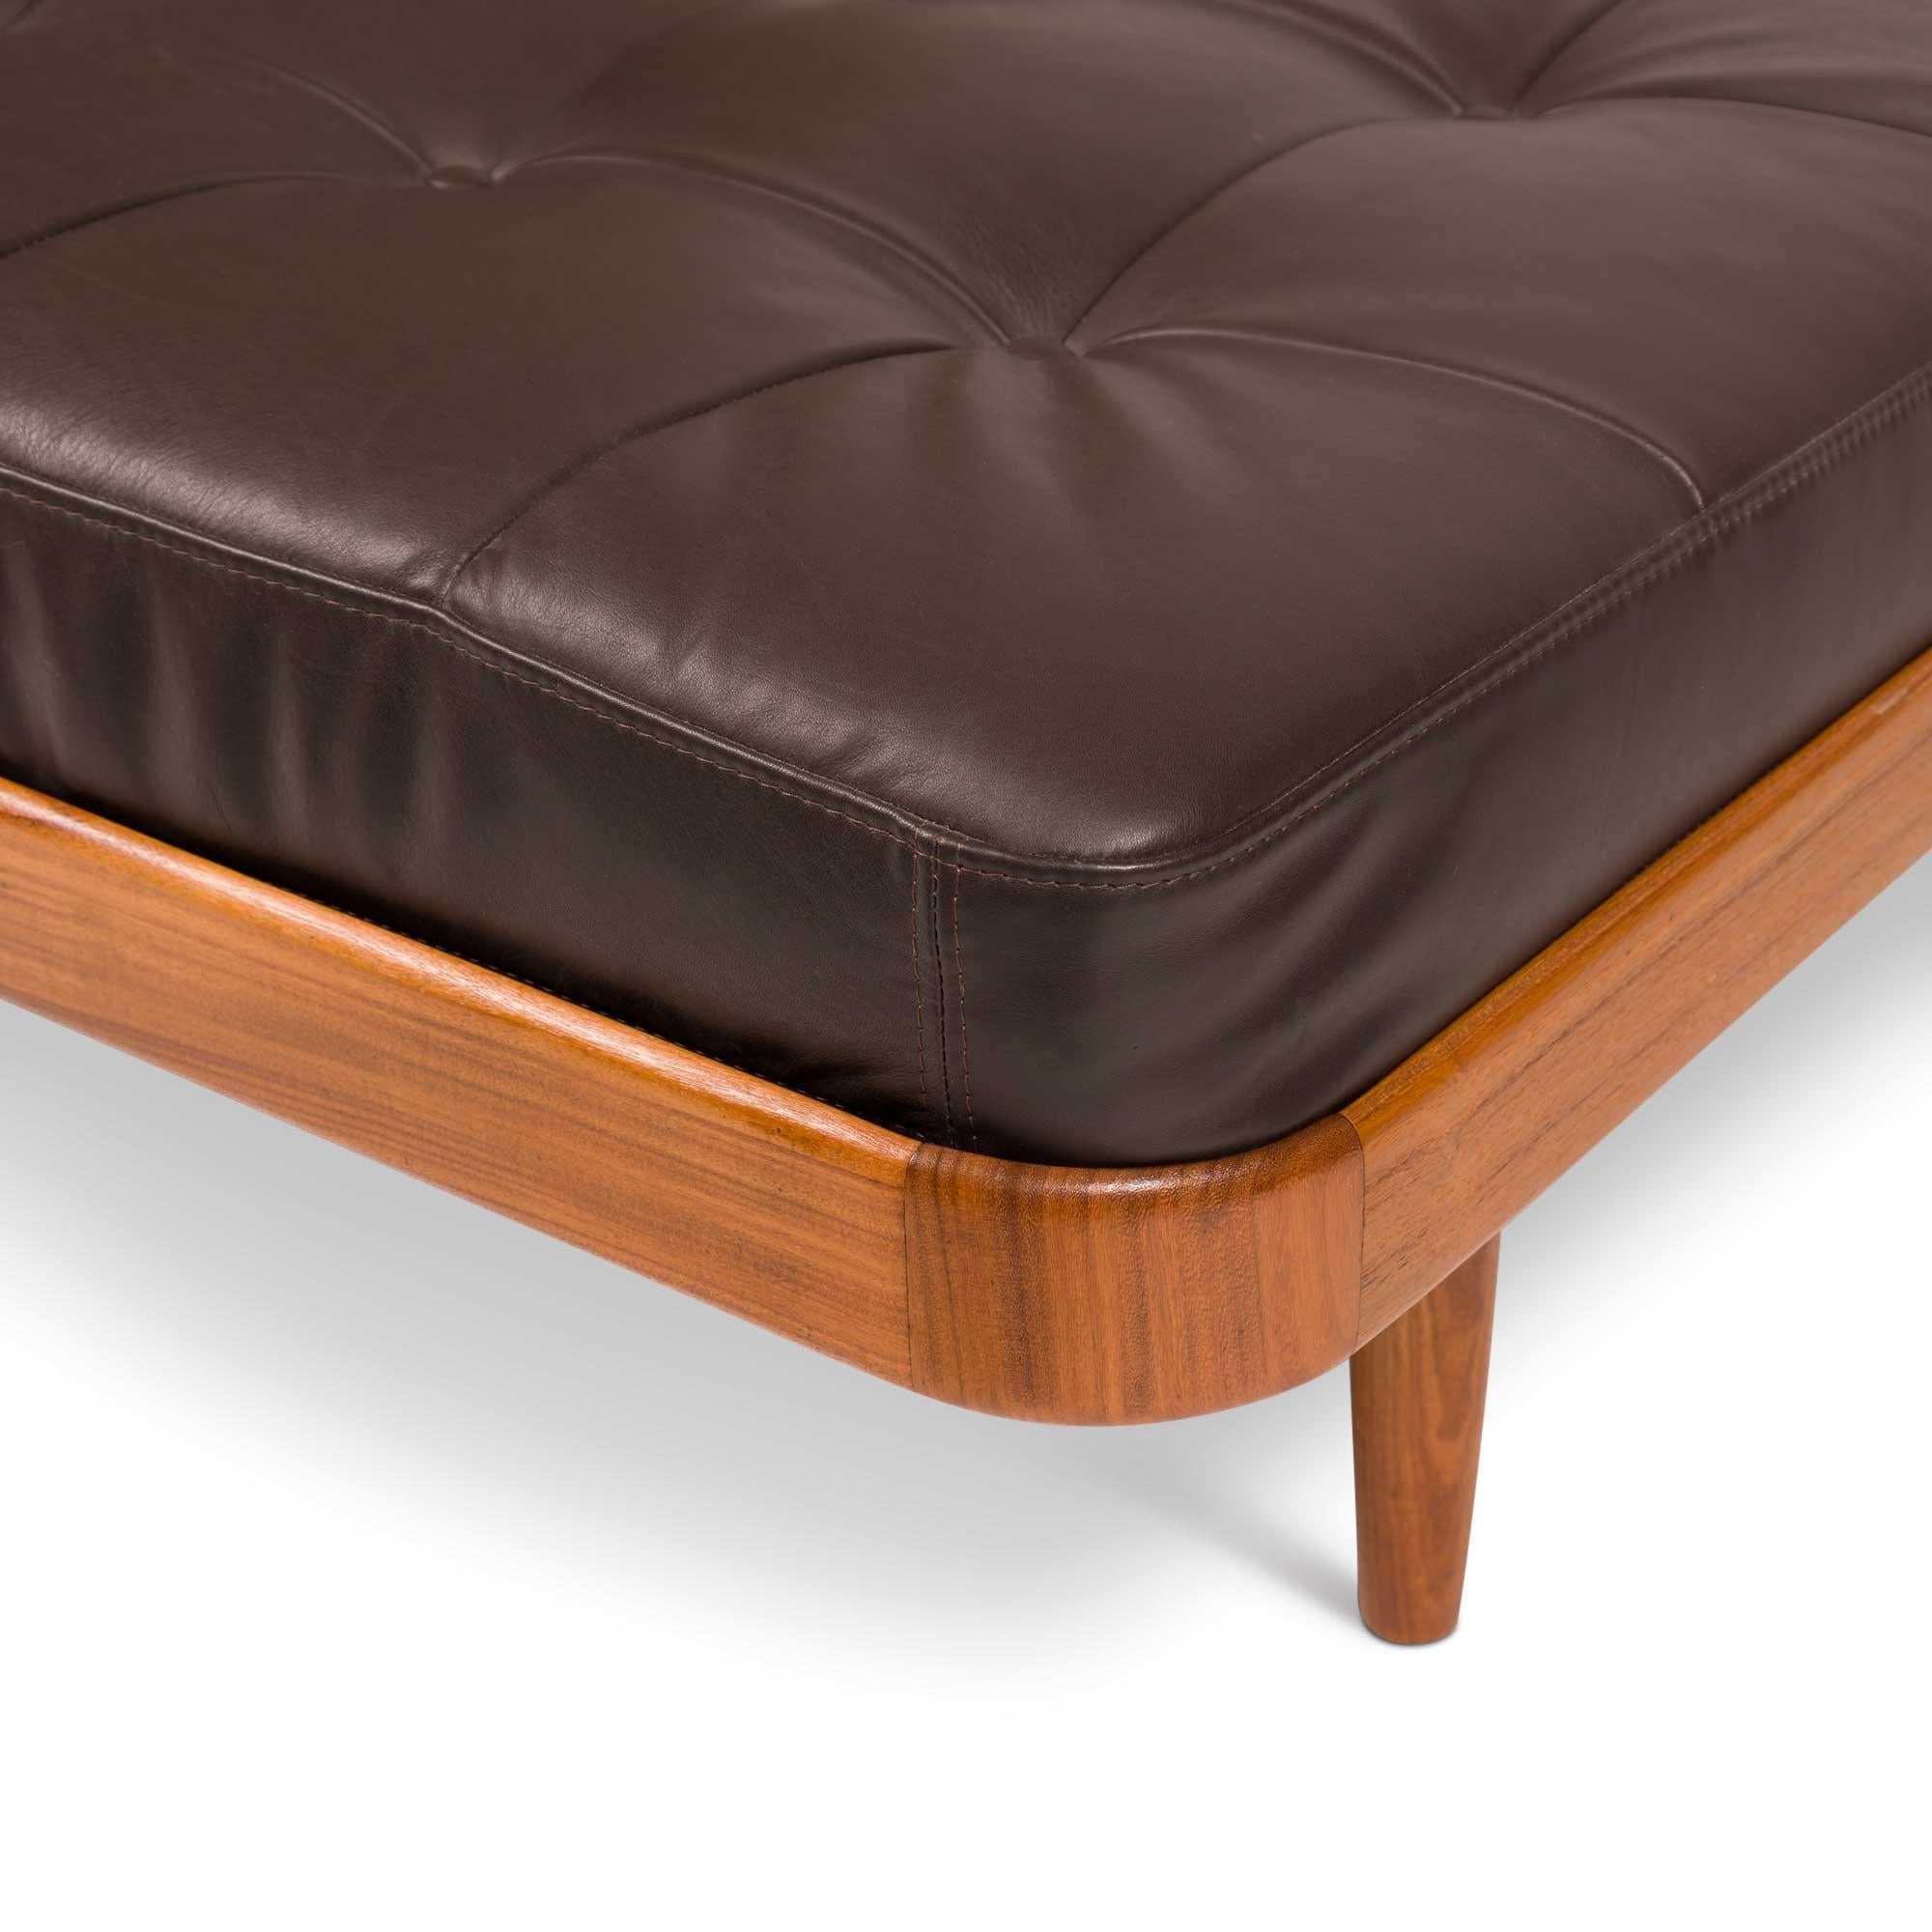 Immerse yourself in the epitome of Danish mid-century design with the Vintage Danish Mid-Century Solid Teak daybed from Horsnaes Møbler. Originating from Denmark circa 1956, this sophisticated daybed is a testament to exquisite craftsmanship and a